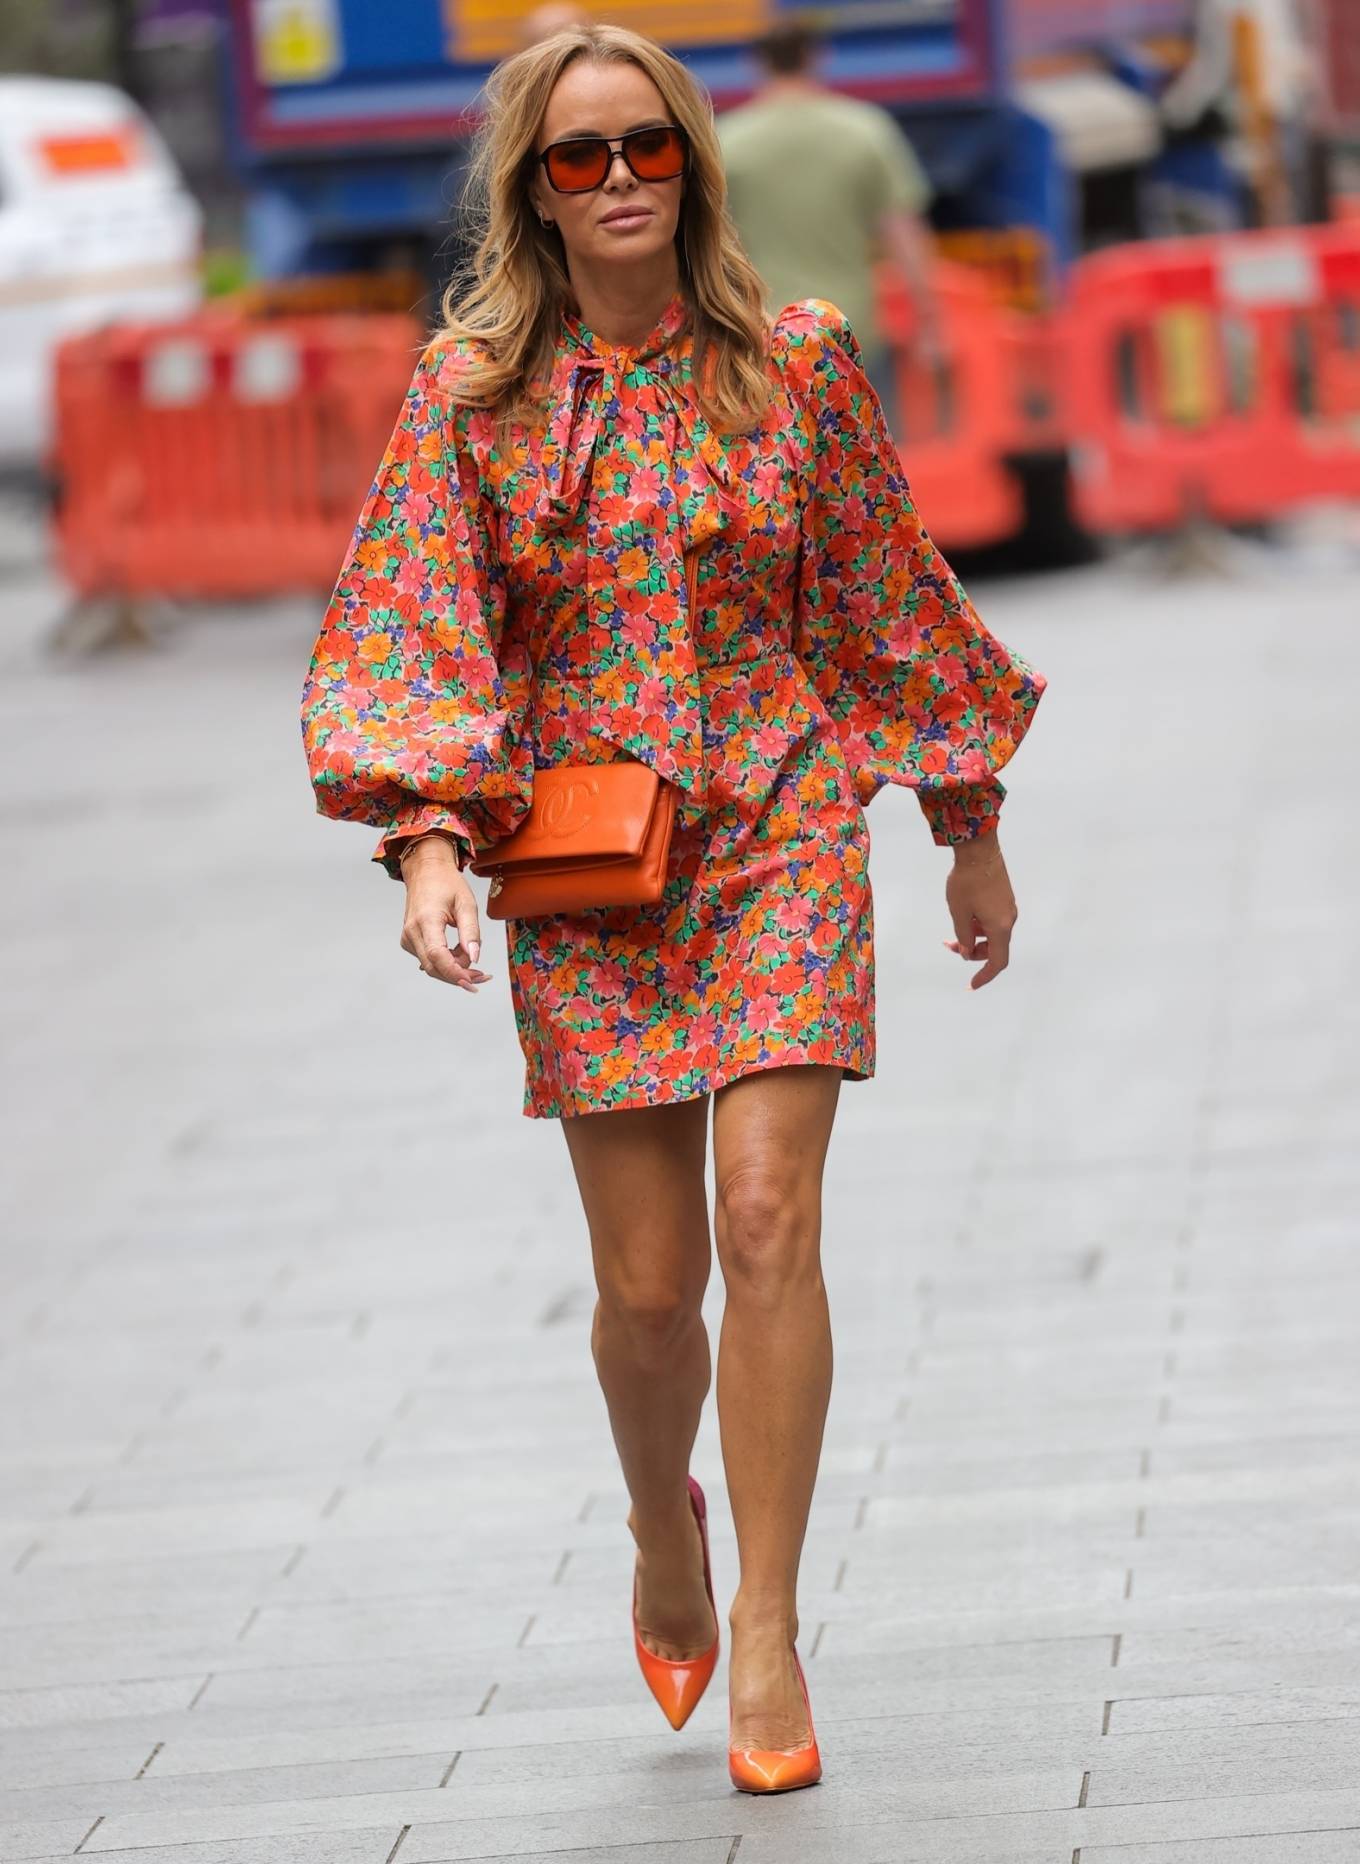 Amanda Holden - Steps out in florals at Global Radio in London